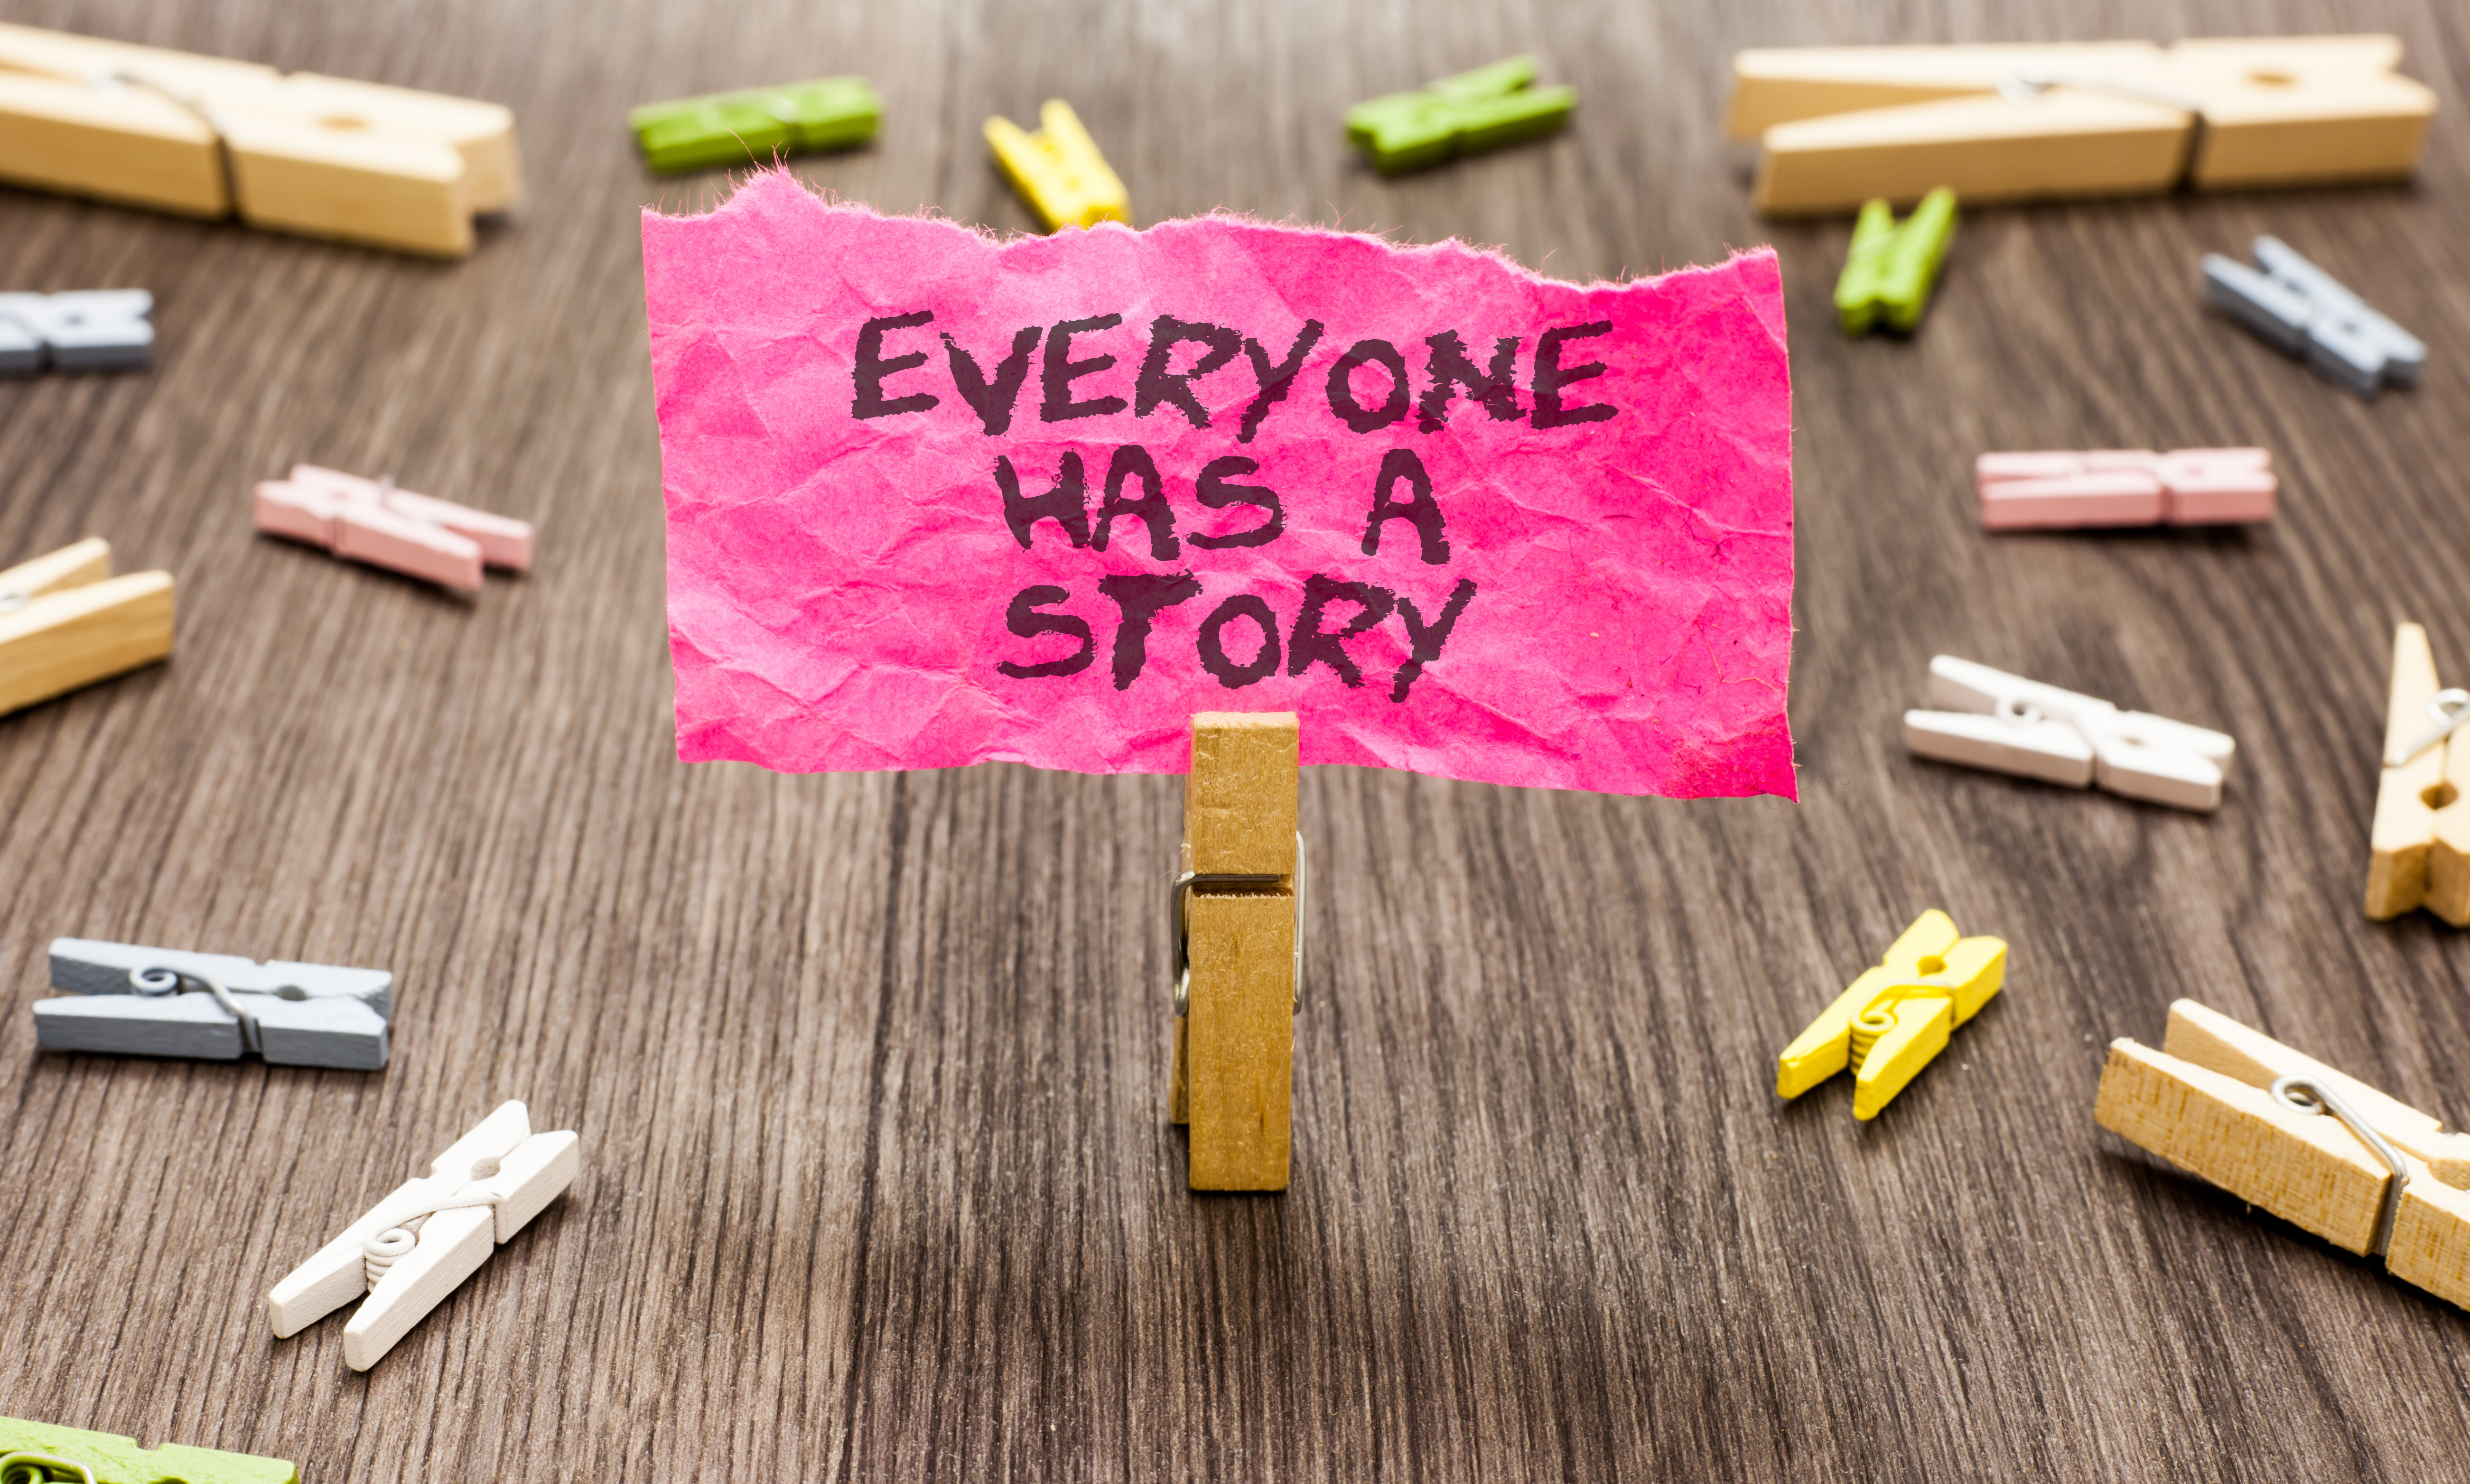 Everyone has a story written on a post it note